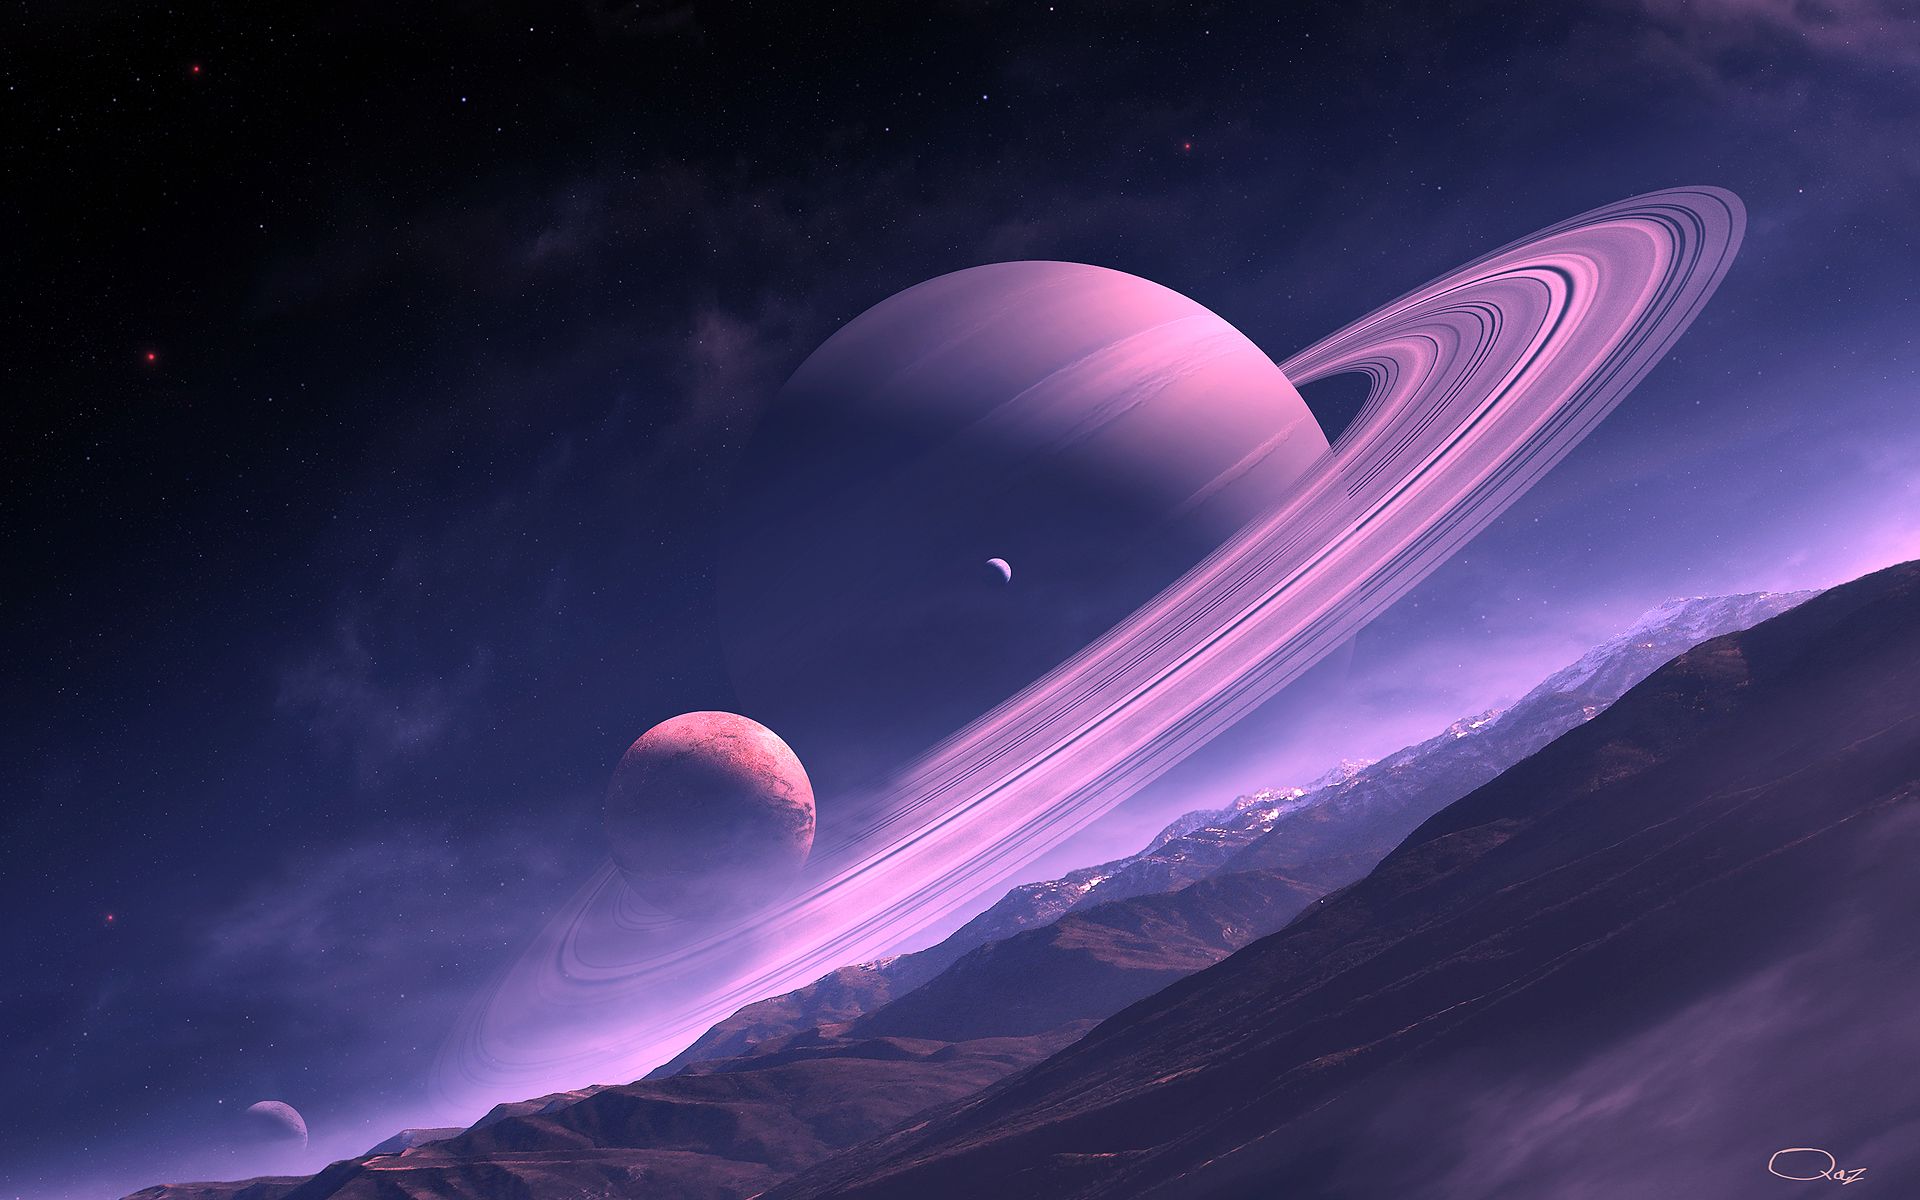 A purple planet with two moons in the sky - Saturn